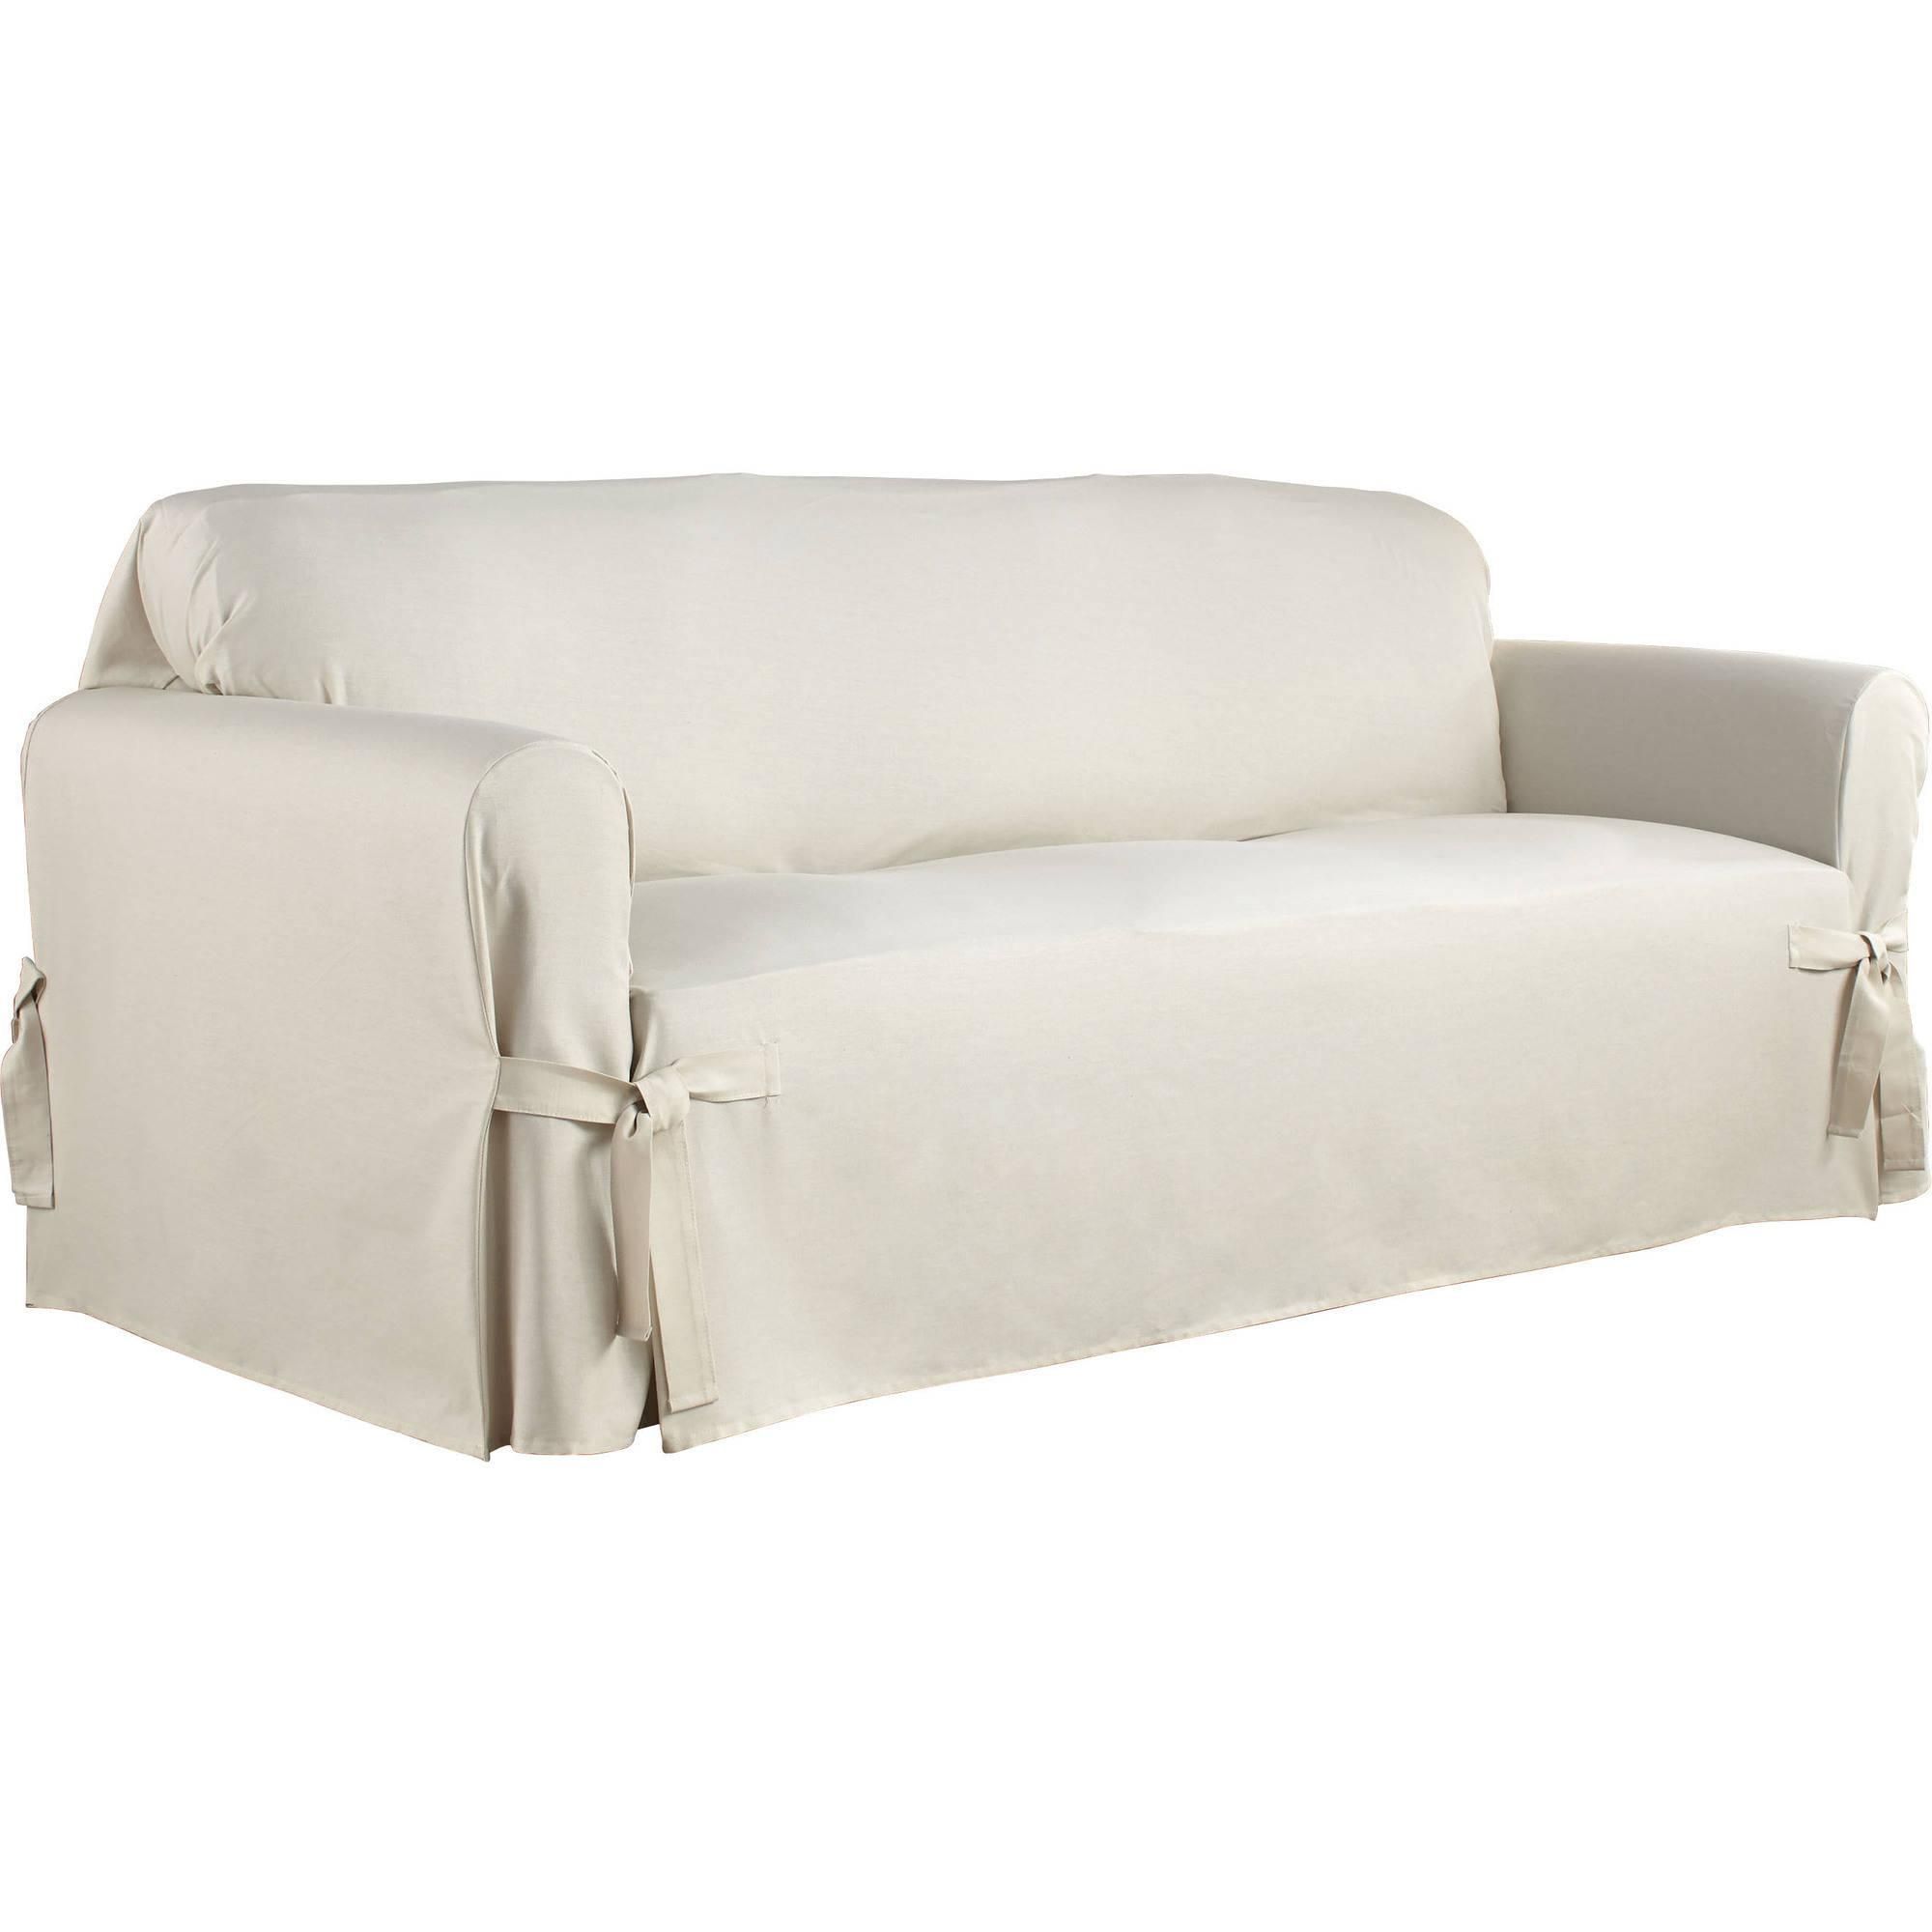 Serta Relaxed Fit Duck Furniture Slipcover, Sofa 1 Piece Box For Walmart Slipcovers For Sofas (View 16 of 20)